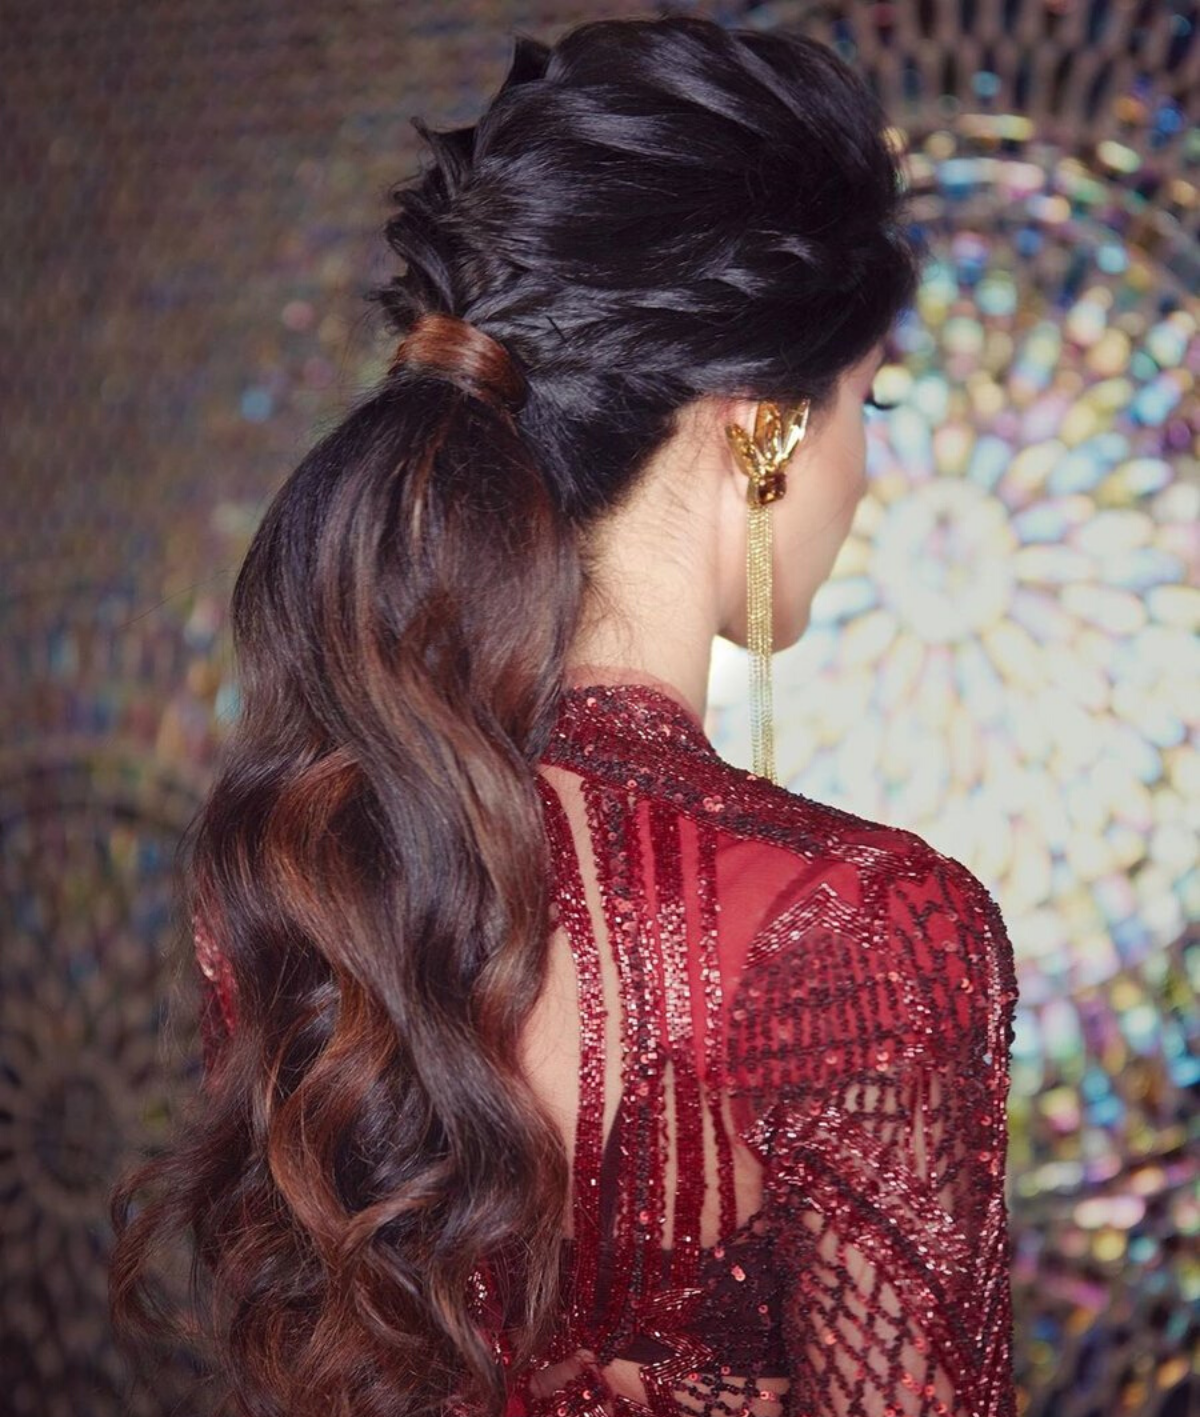 Looking for the Right Hairstyle for Gown Here Are 8 Ideas for You